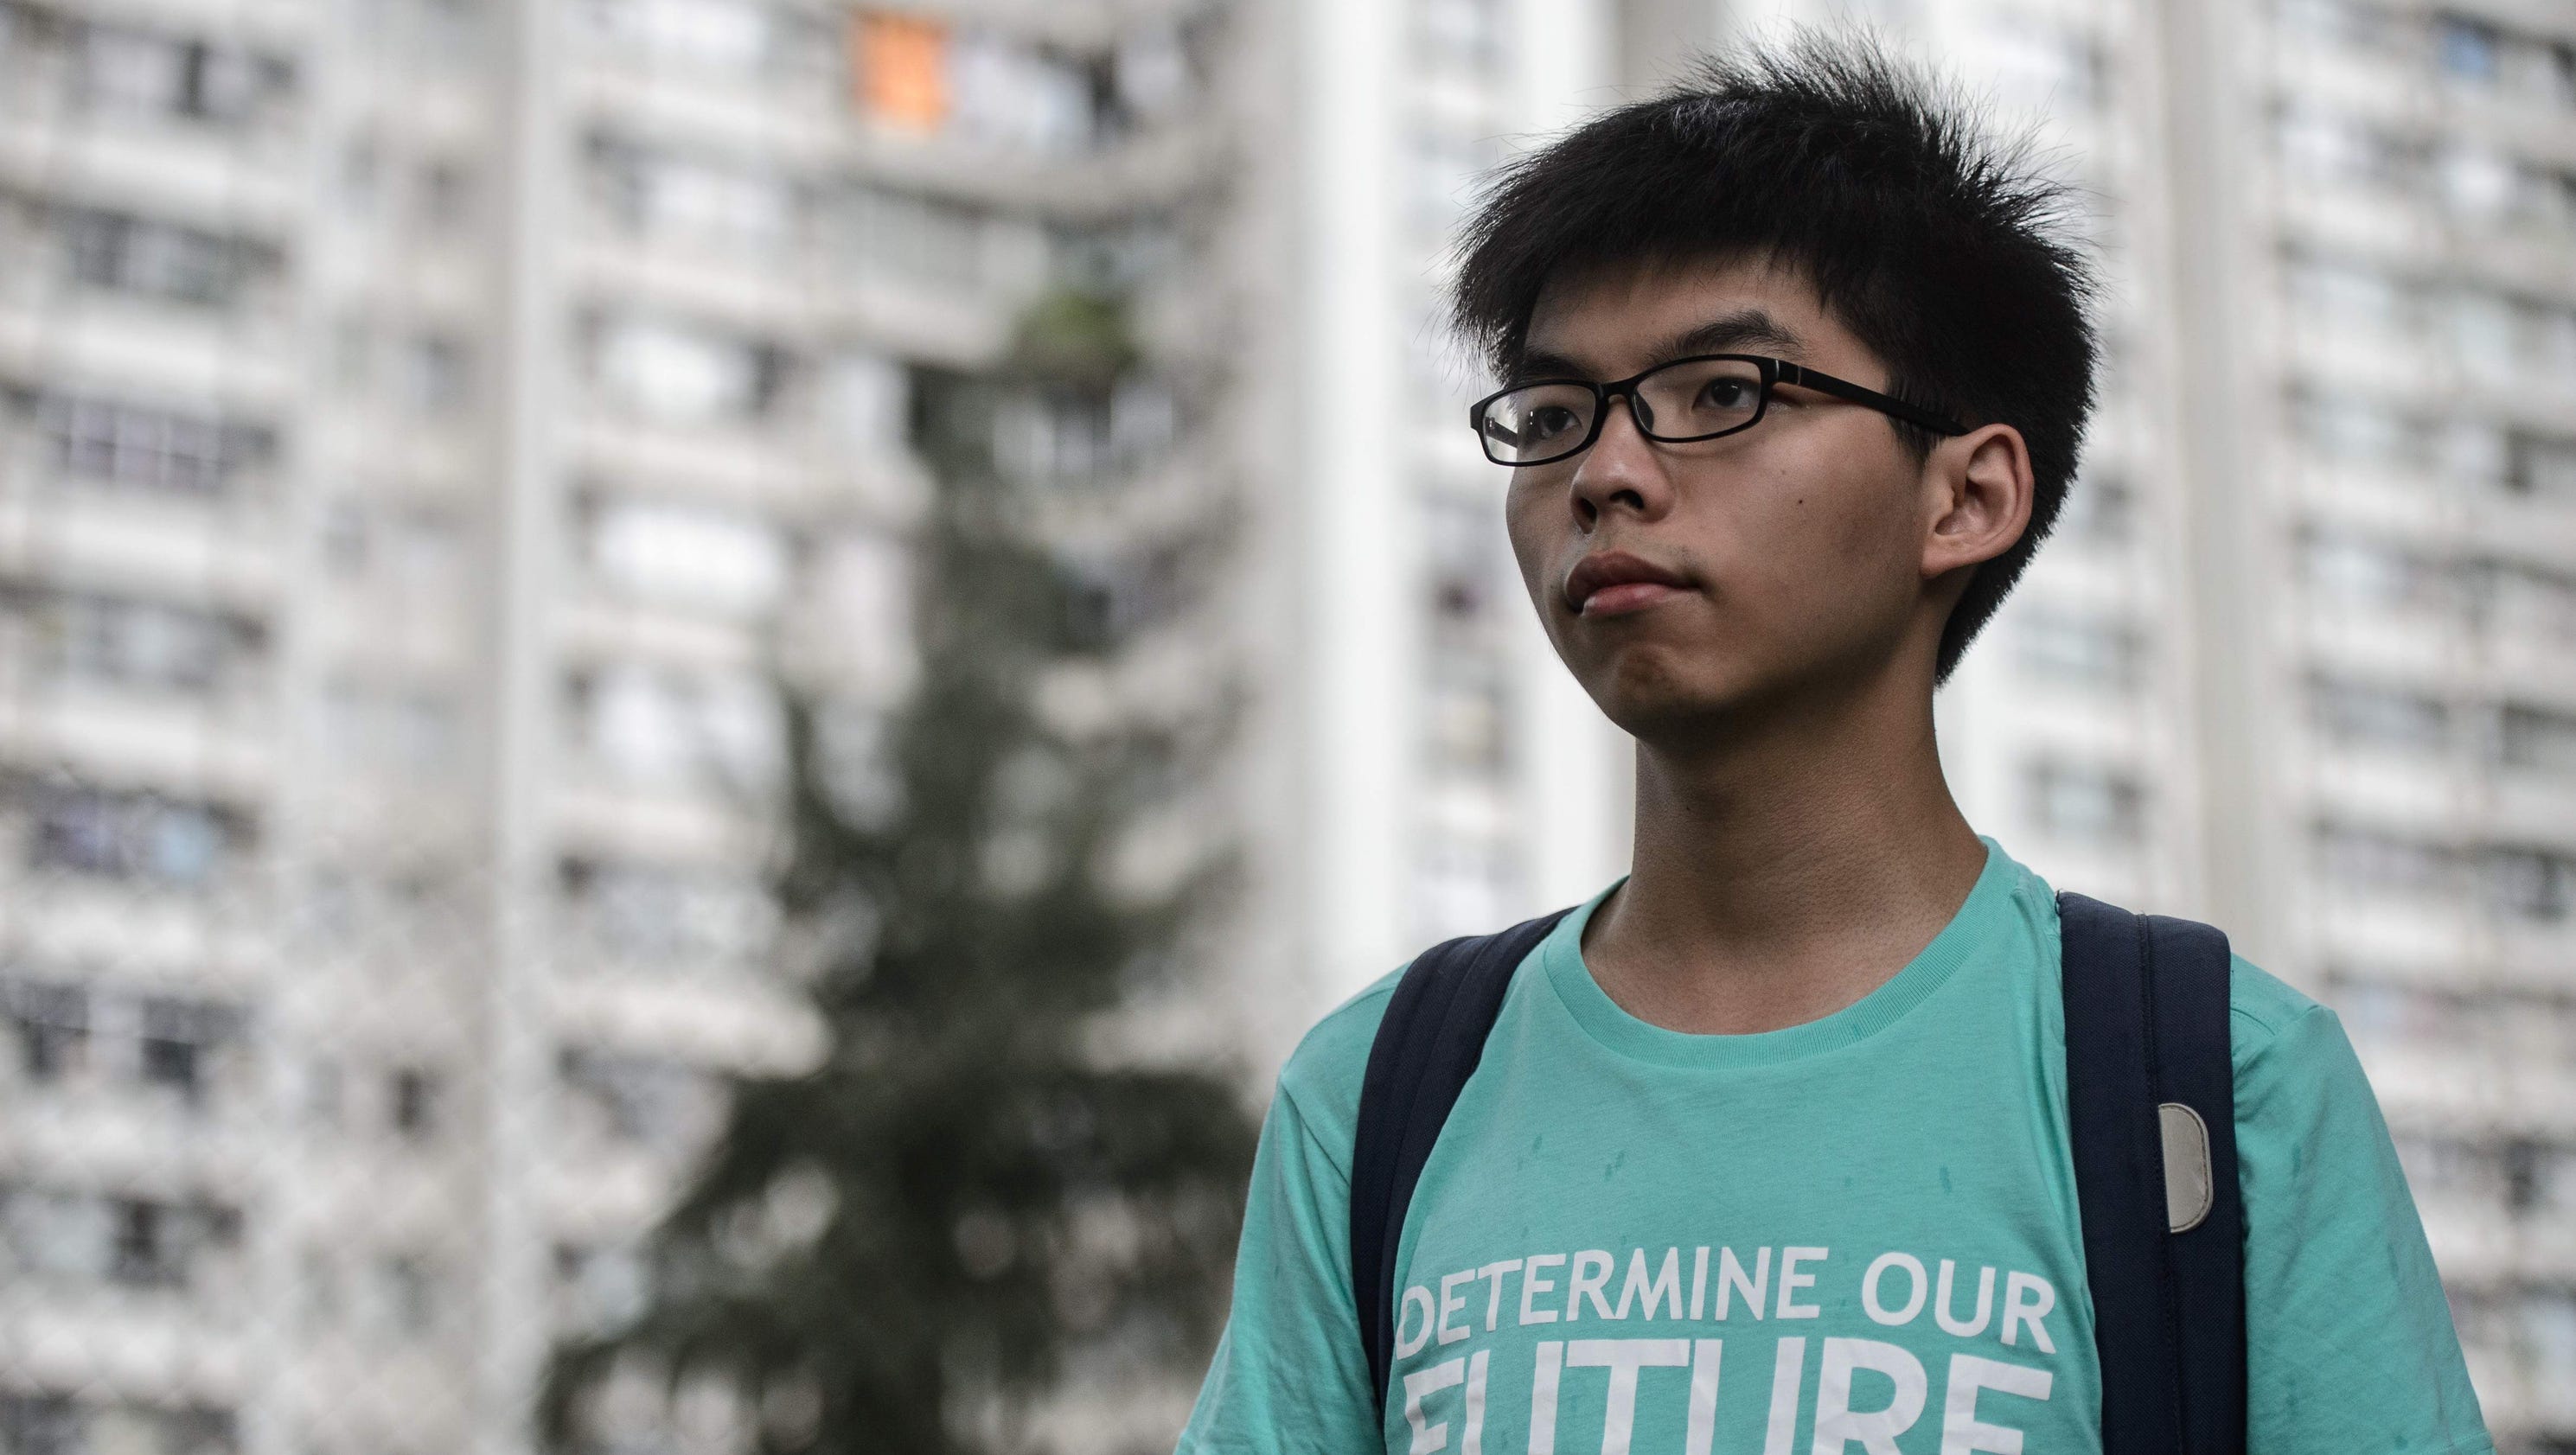 Hong Kong teen activist acquitted over 2014 China protest3200 x 1680